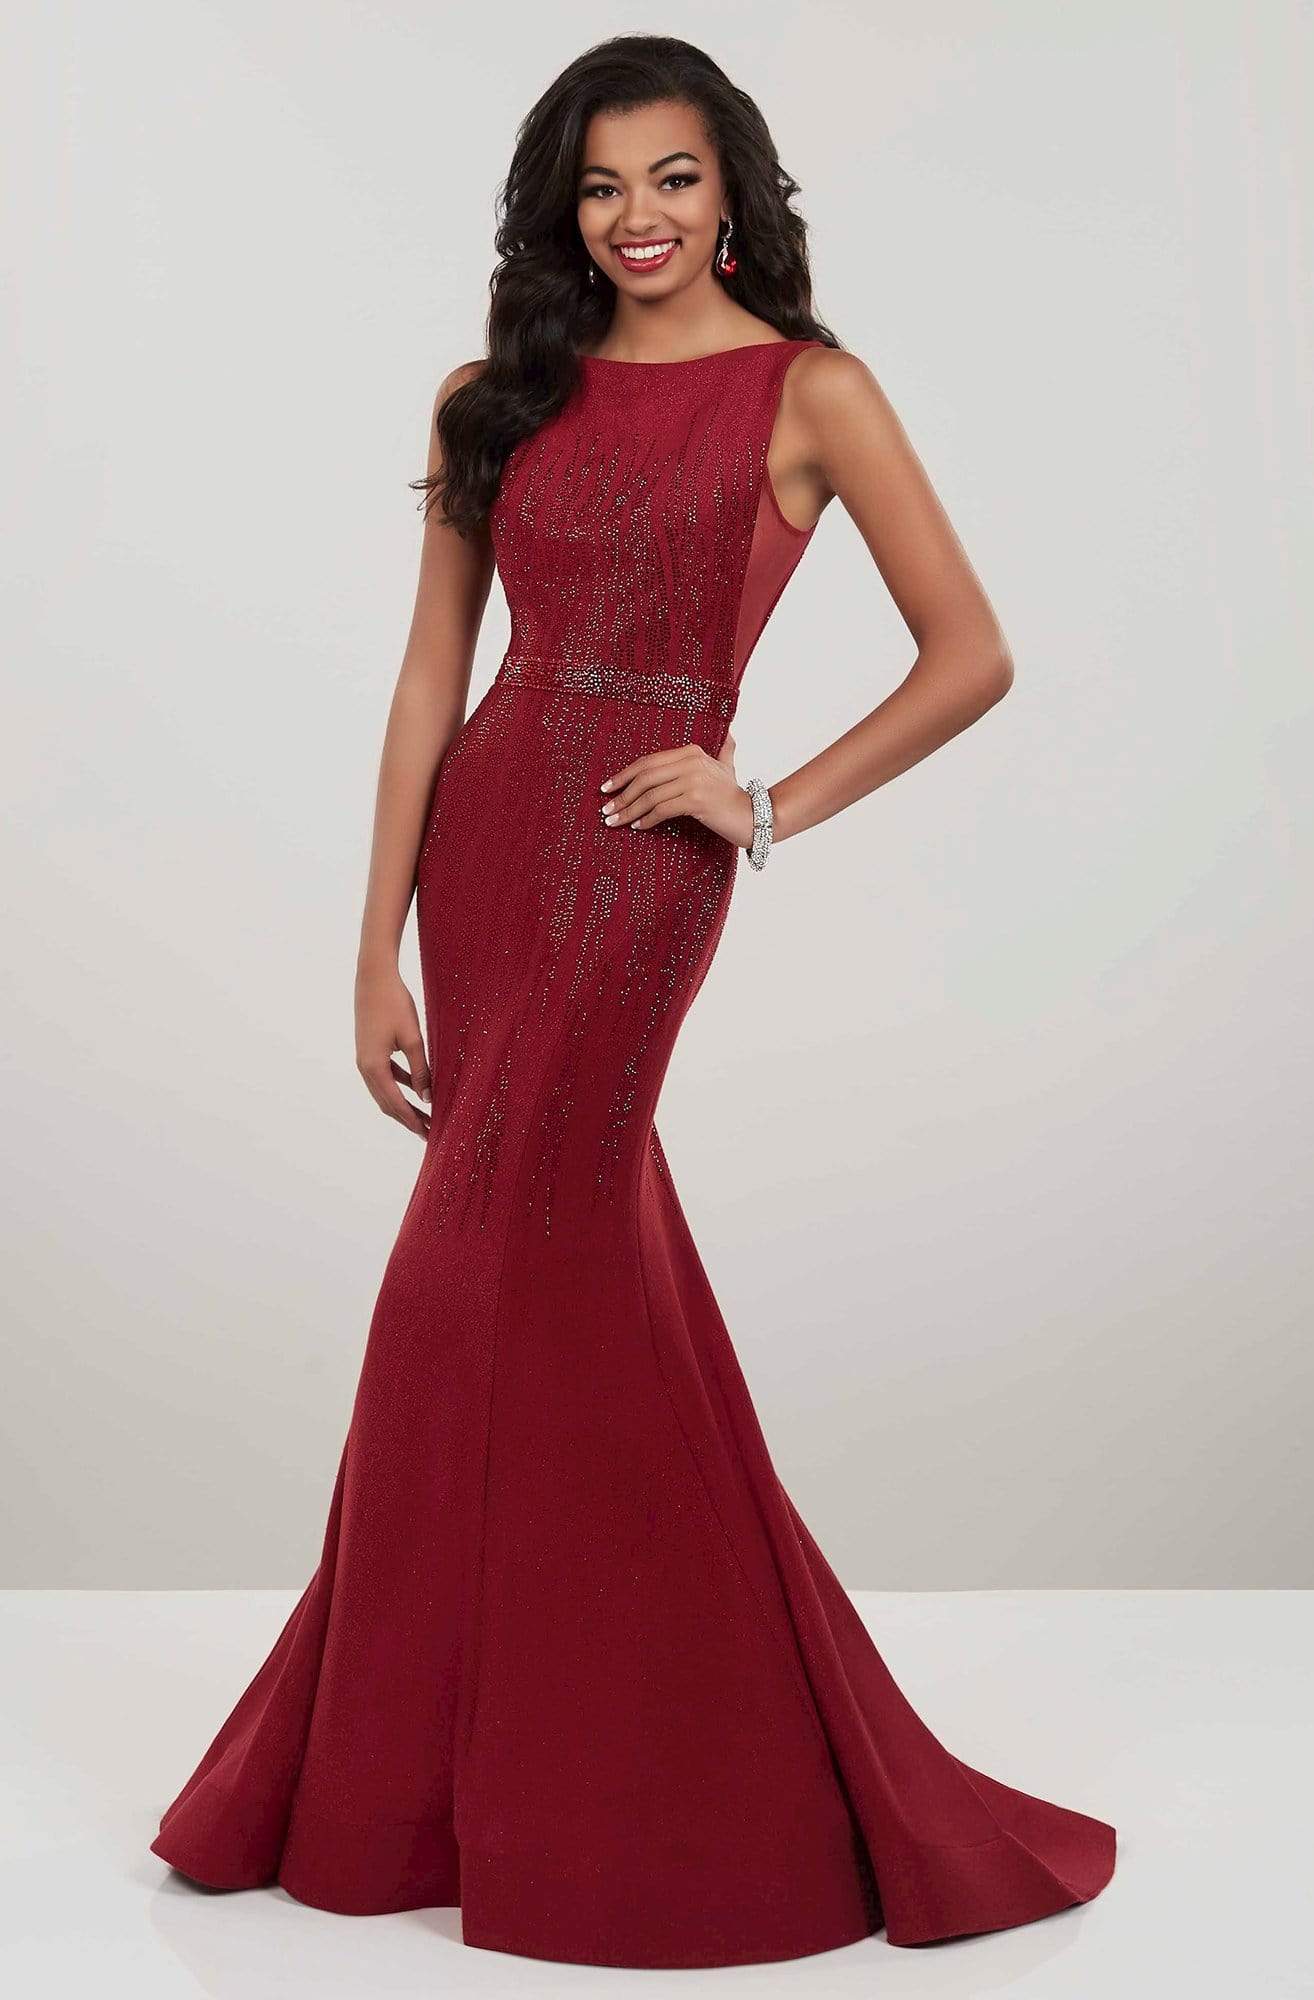 Panoply - 14946 Embellished Bateau Jersey Mermaid Dress Special Occasion Dress 0 / Wine